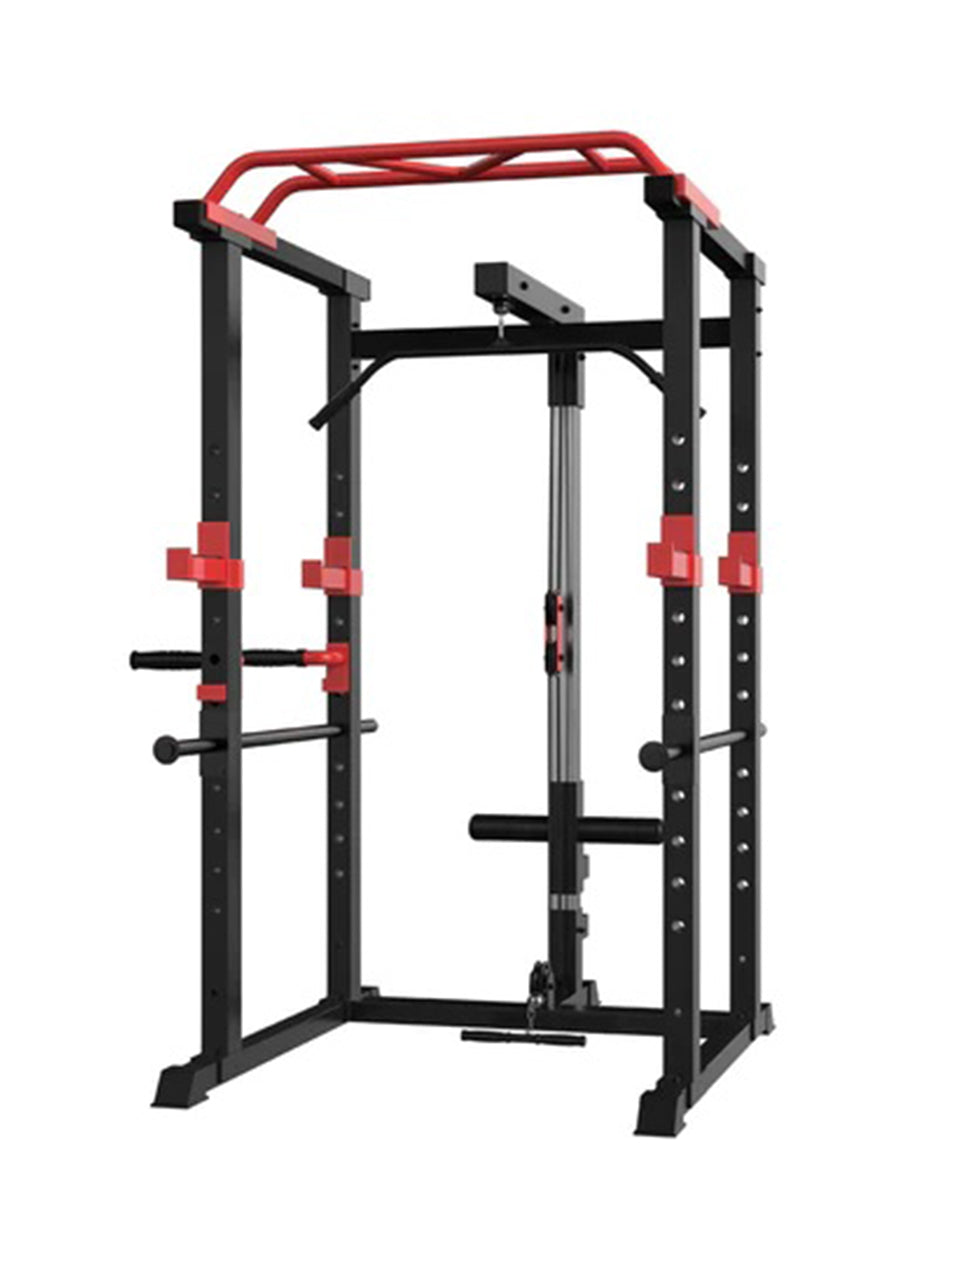 1441 Fitness Heavy Duty Squat Rack & Power Cage with Pull Up Bar and Lat Attachment J008 - Grey Color Frame